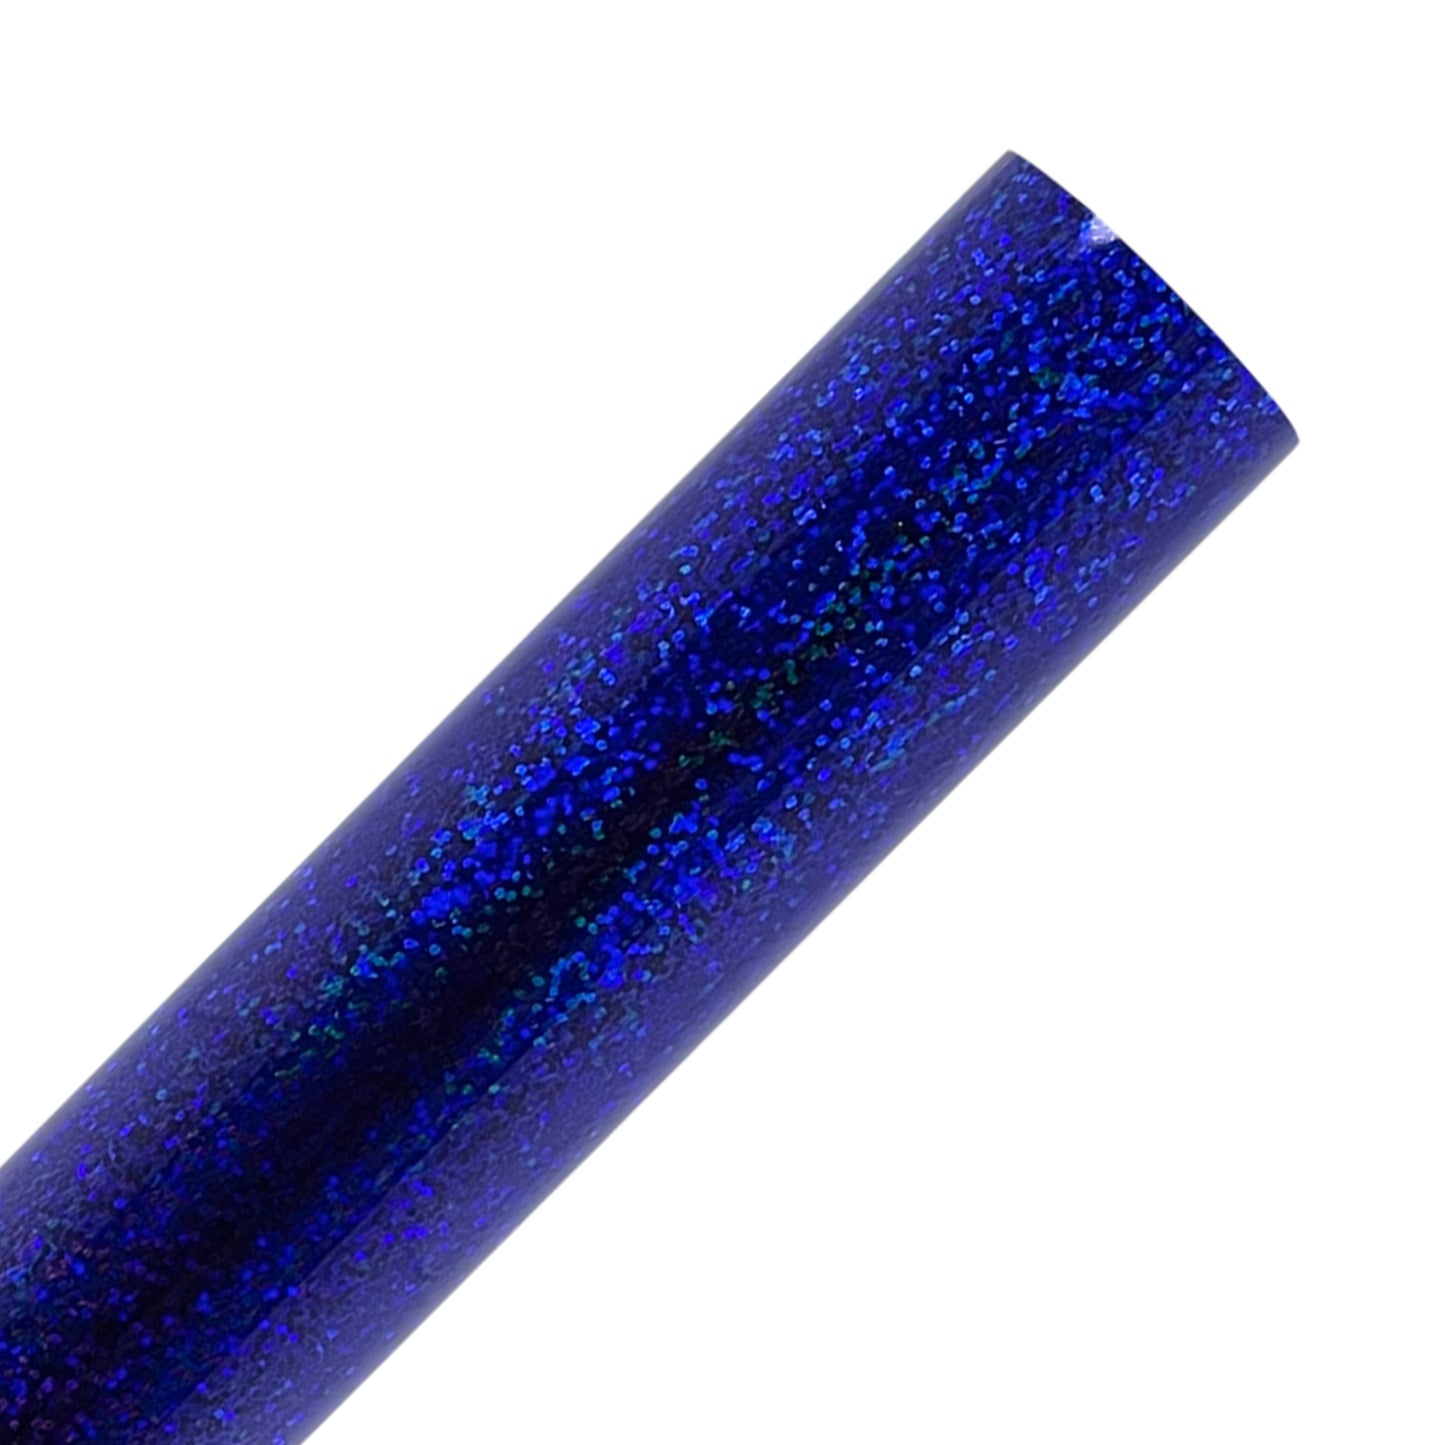 Blue Holographic Sparkle Heat Transfer Vinyl Sheets By Craftables